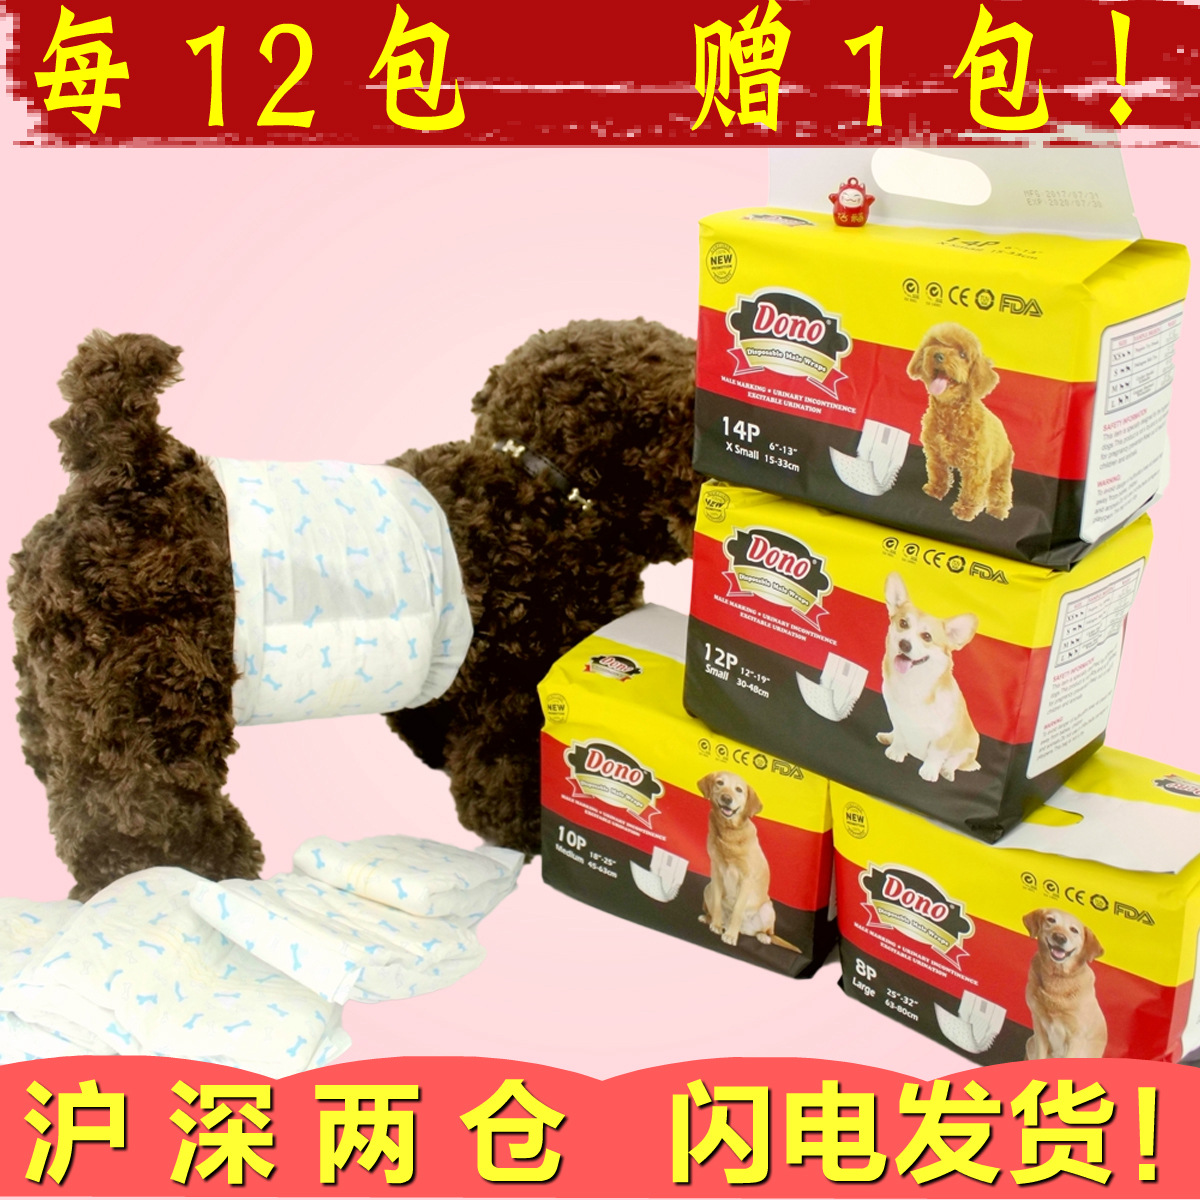 Dono [New] Male Dog Menstrual Panties Dog Diapers Dog Diaper Diaper Cloth Pet Supplies One Piece Dropshipping